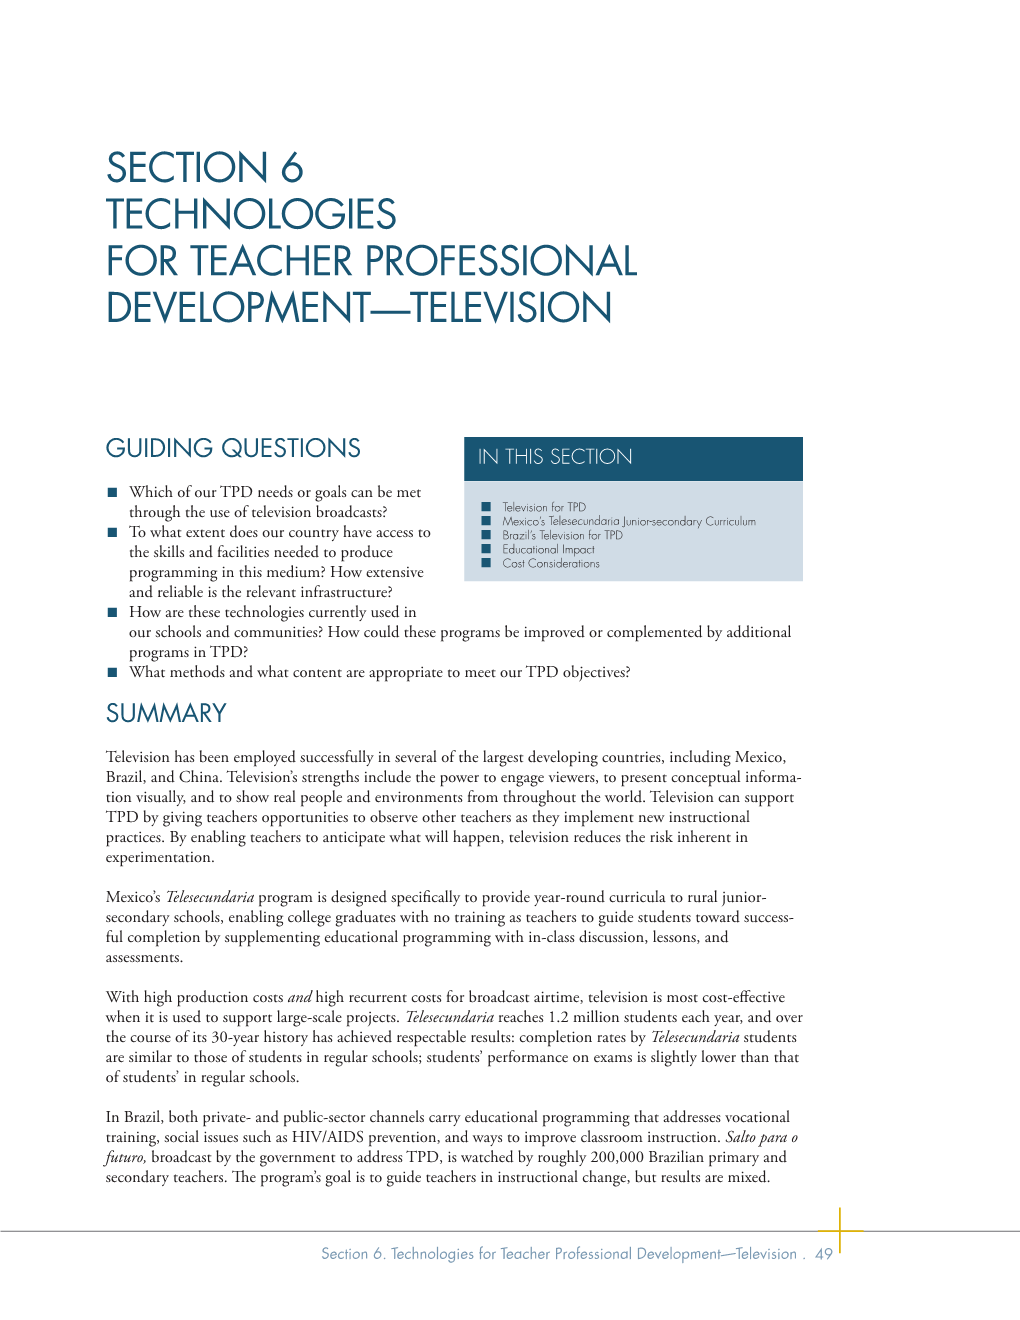 Section 6 Technologies for Teacher Professional Development—Television